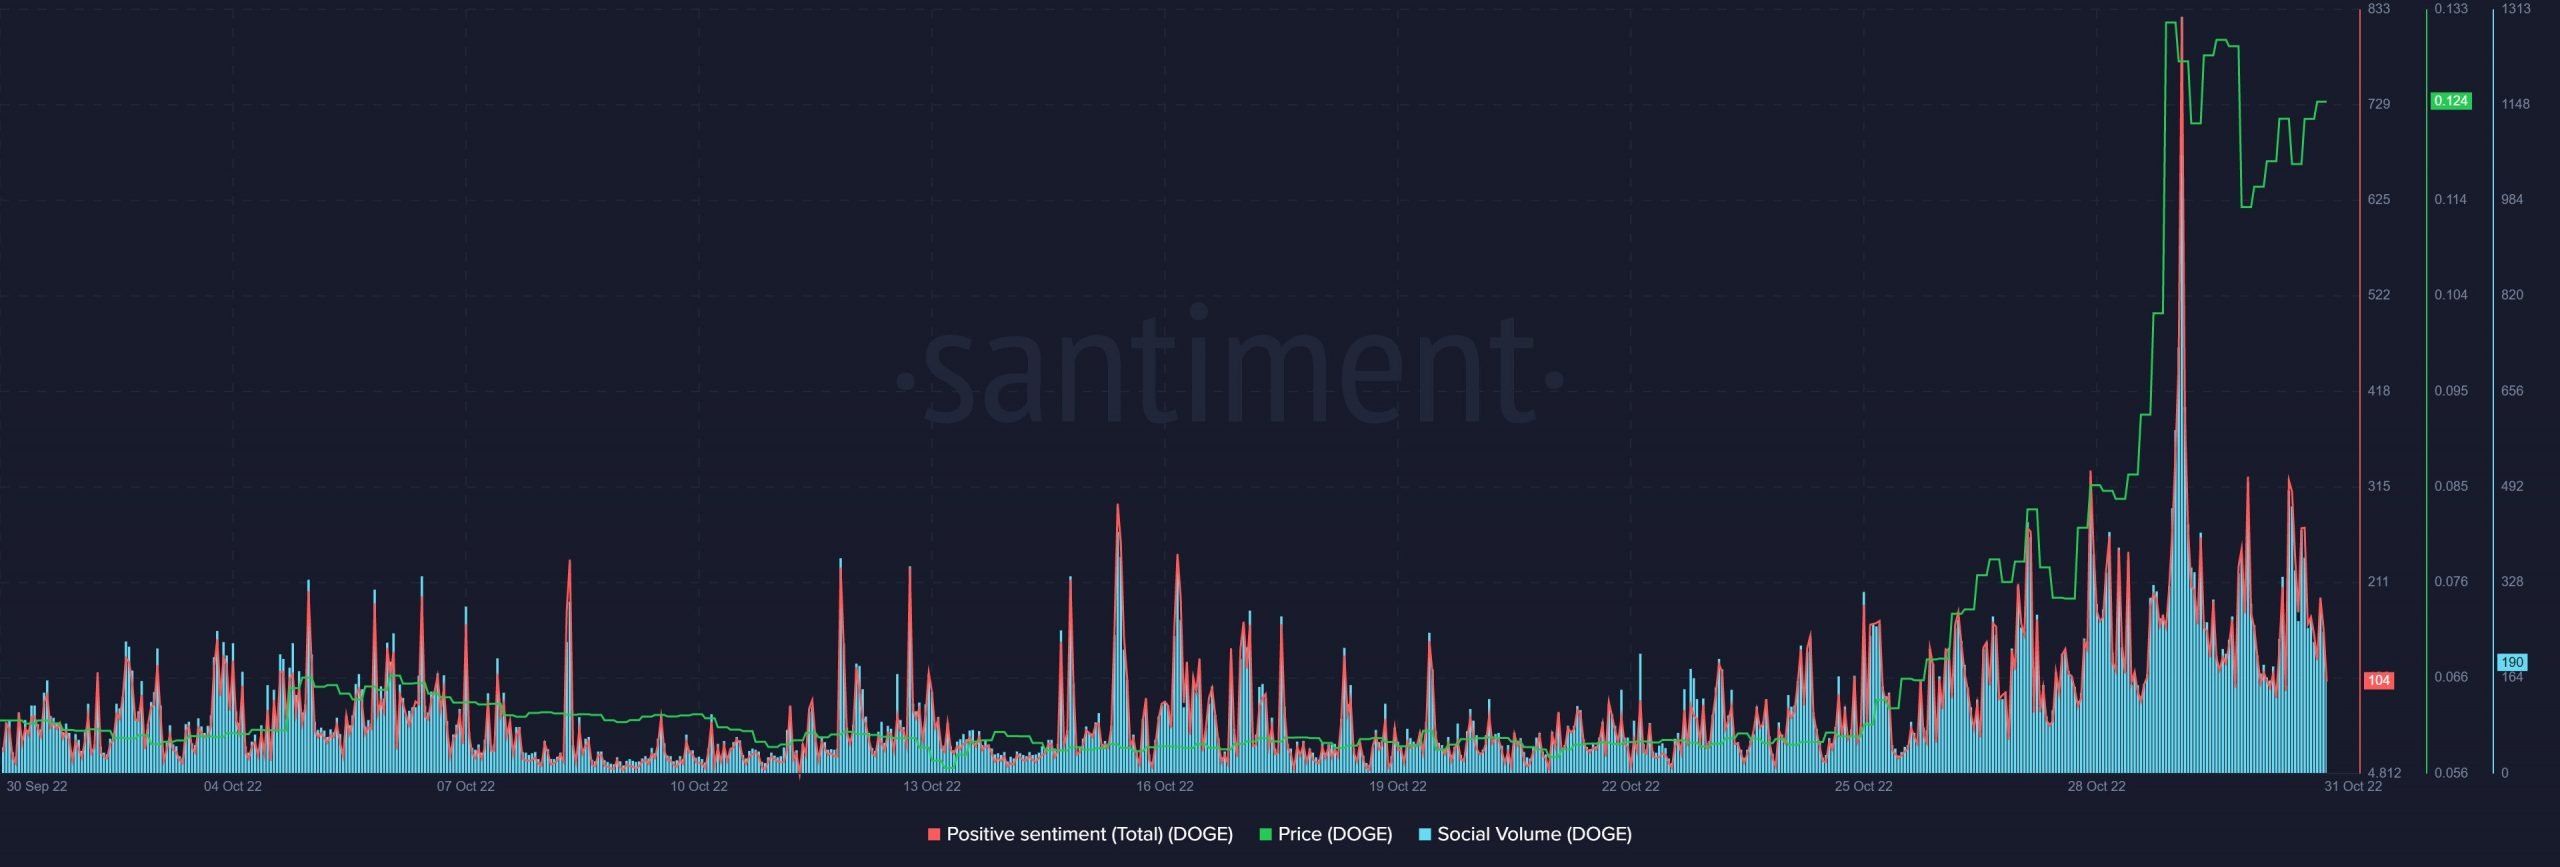 sentiment scaled